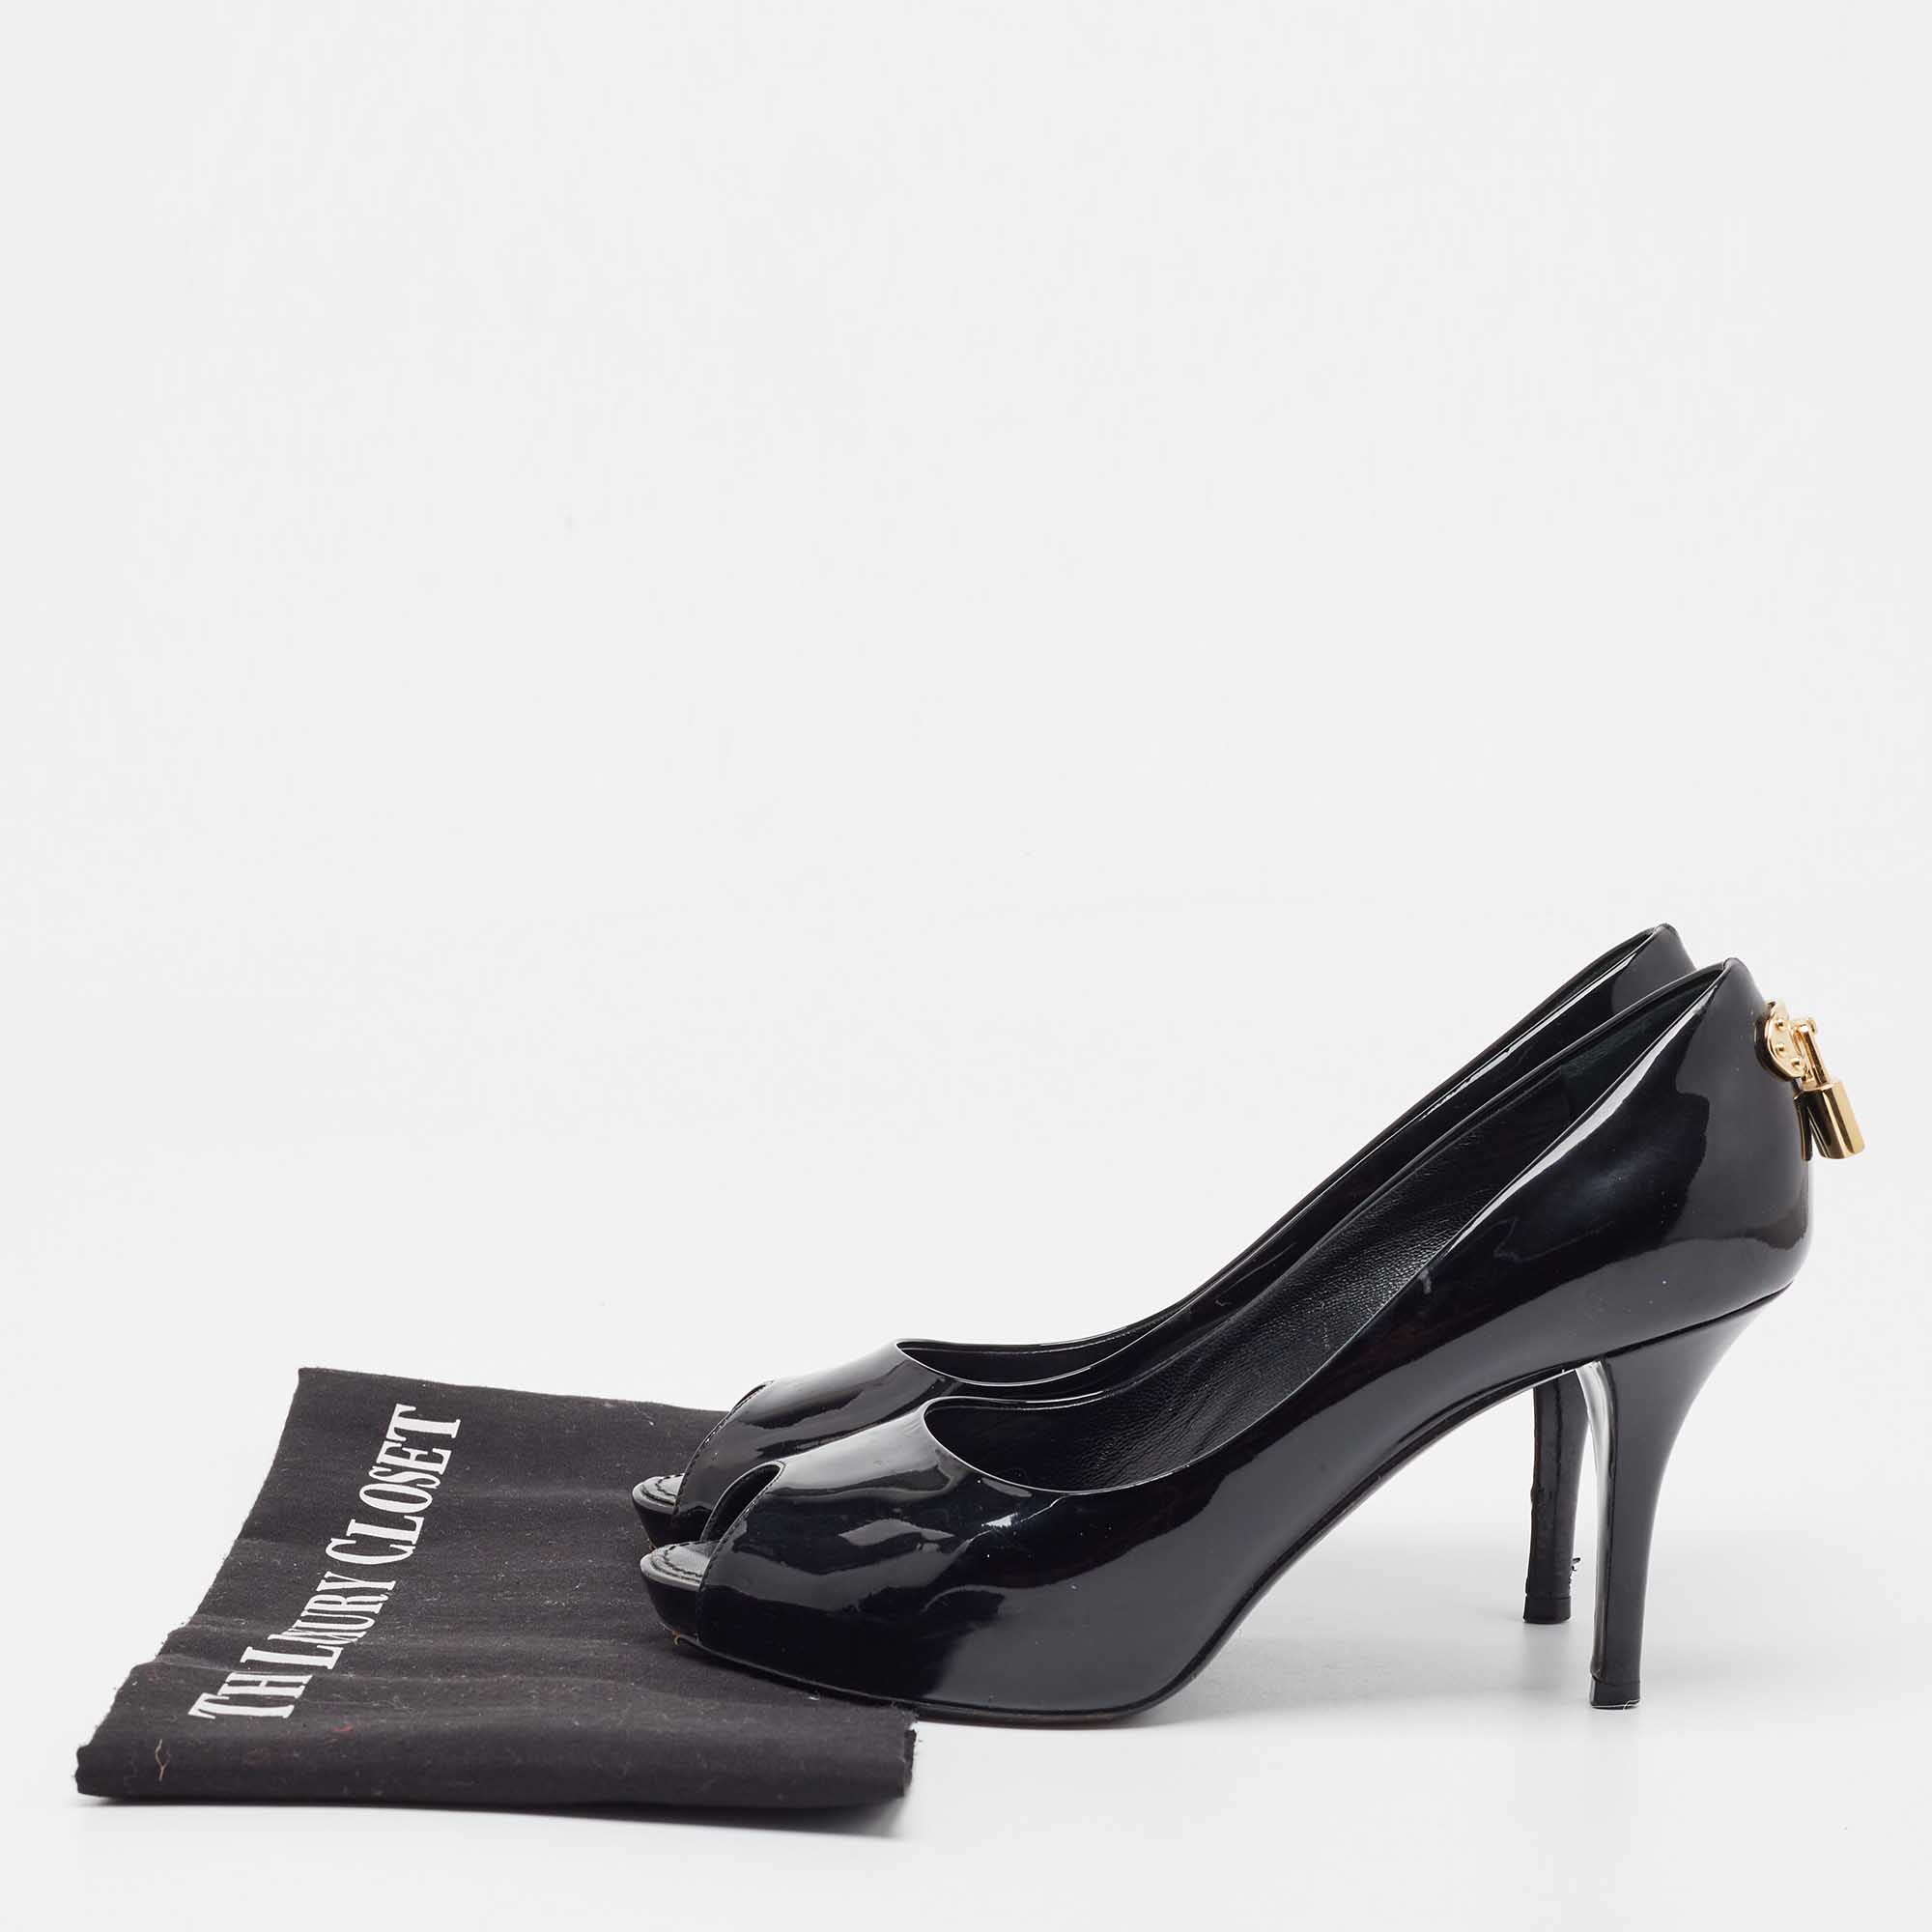 Louis Vuitton Black Patent Leather Oh Really! Peep Toe Pumps Size 37